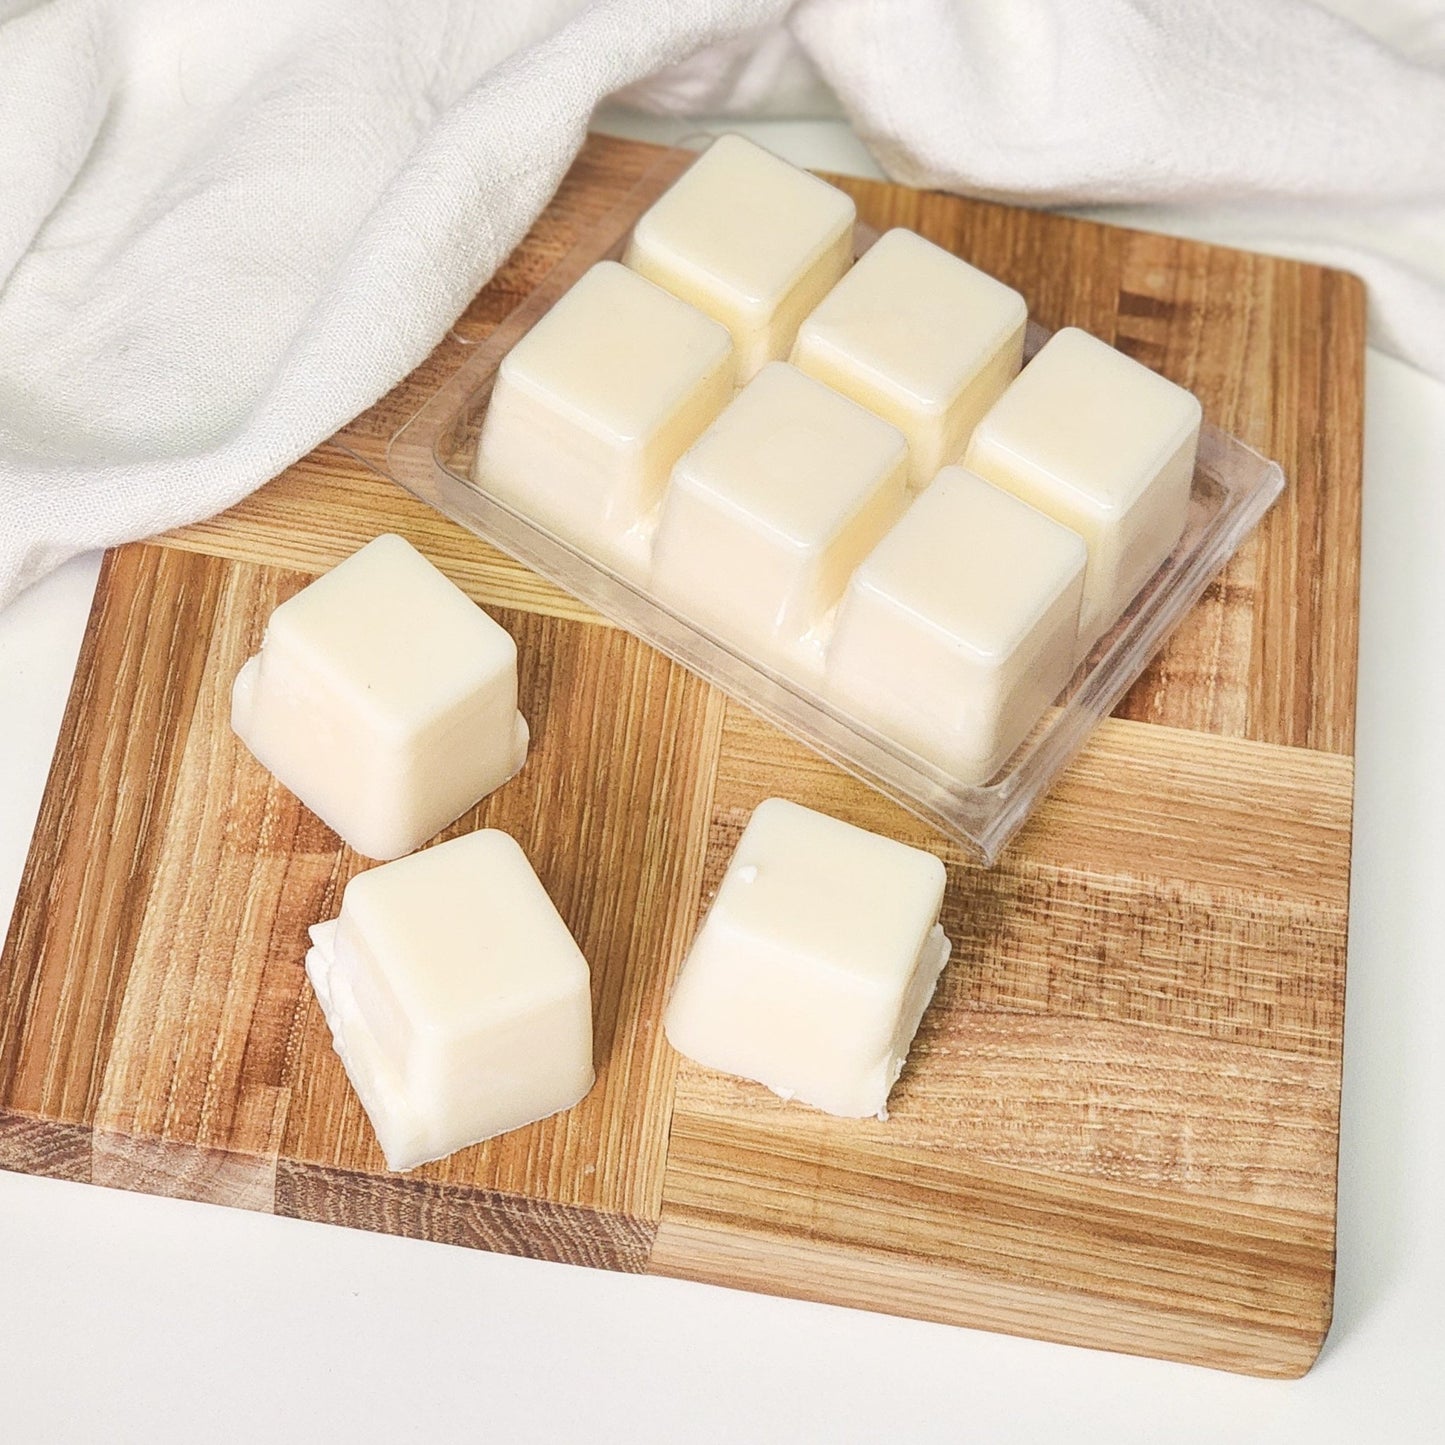 Tobacco and Caramel Soy Wax Melts - Abboo Candle Co